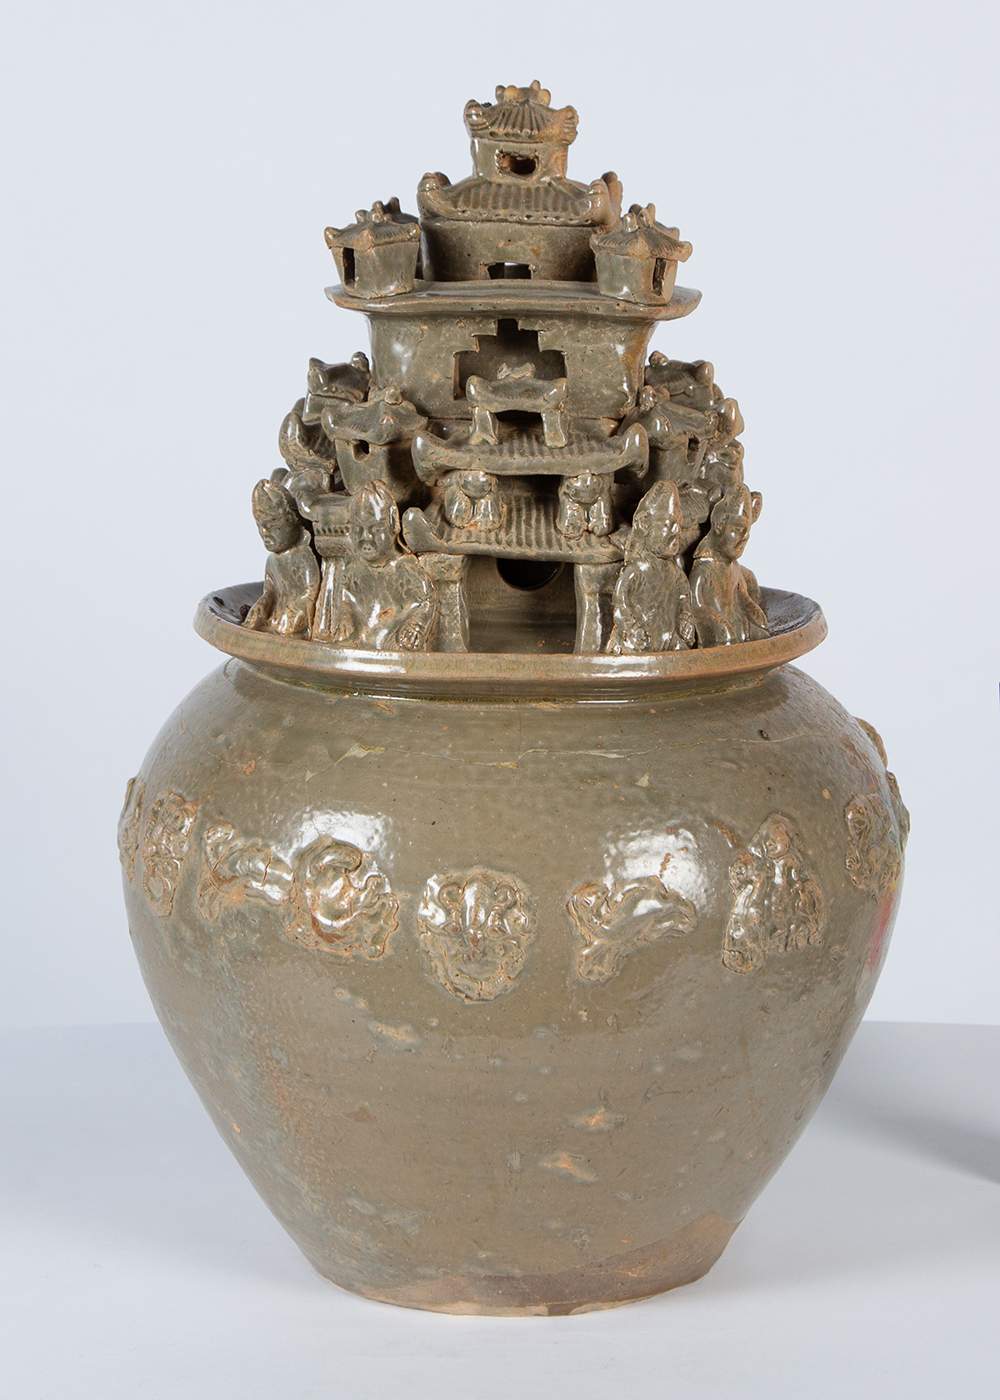 a gray-green urn with a squat round body and carved figures on the lid